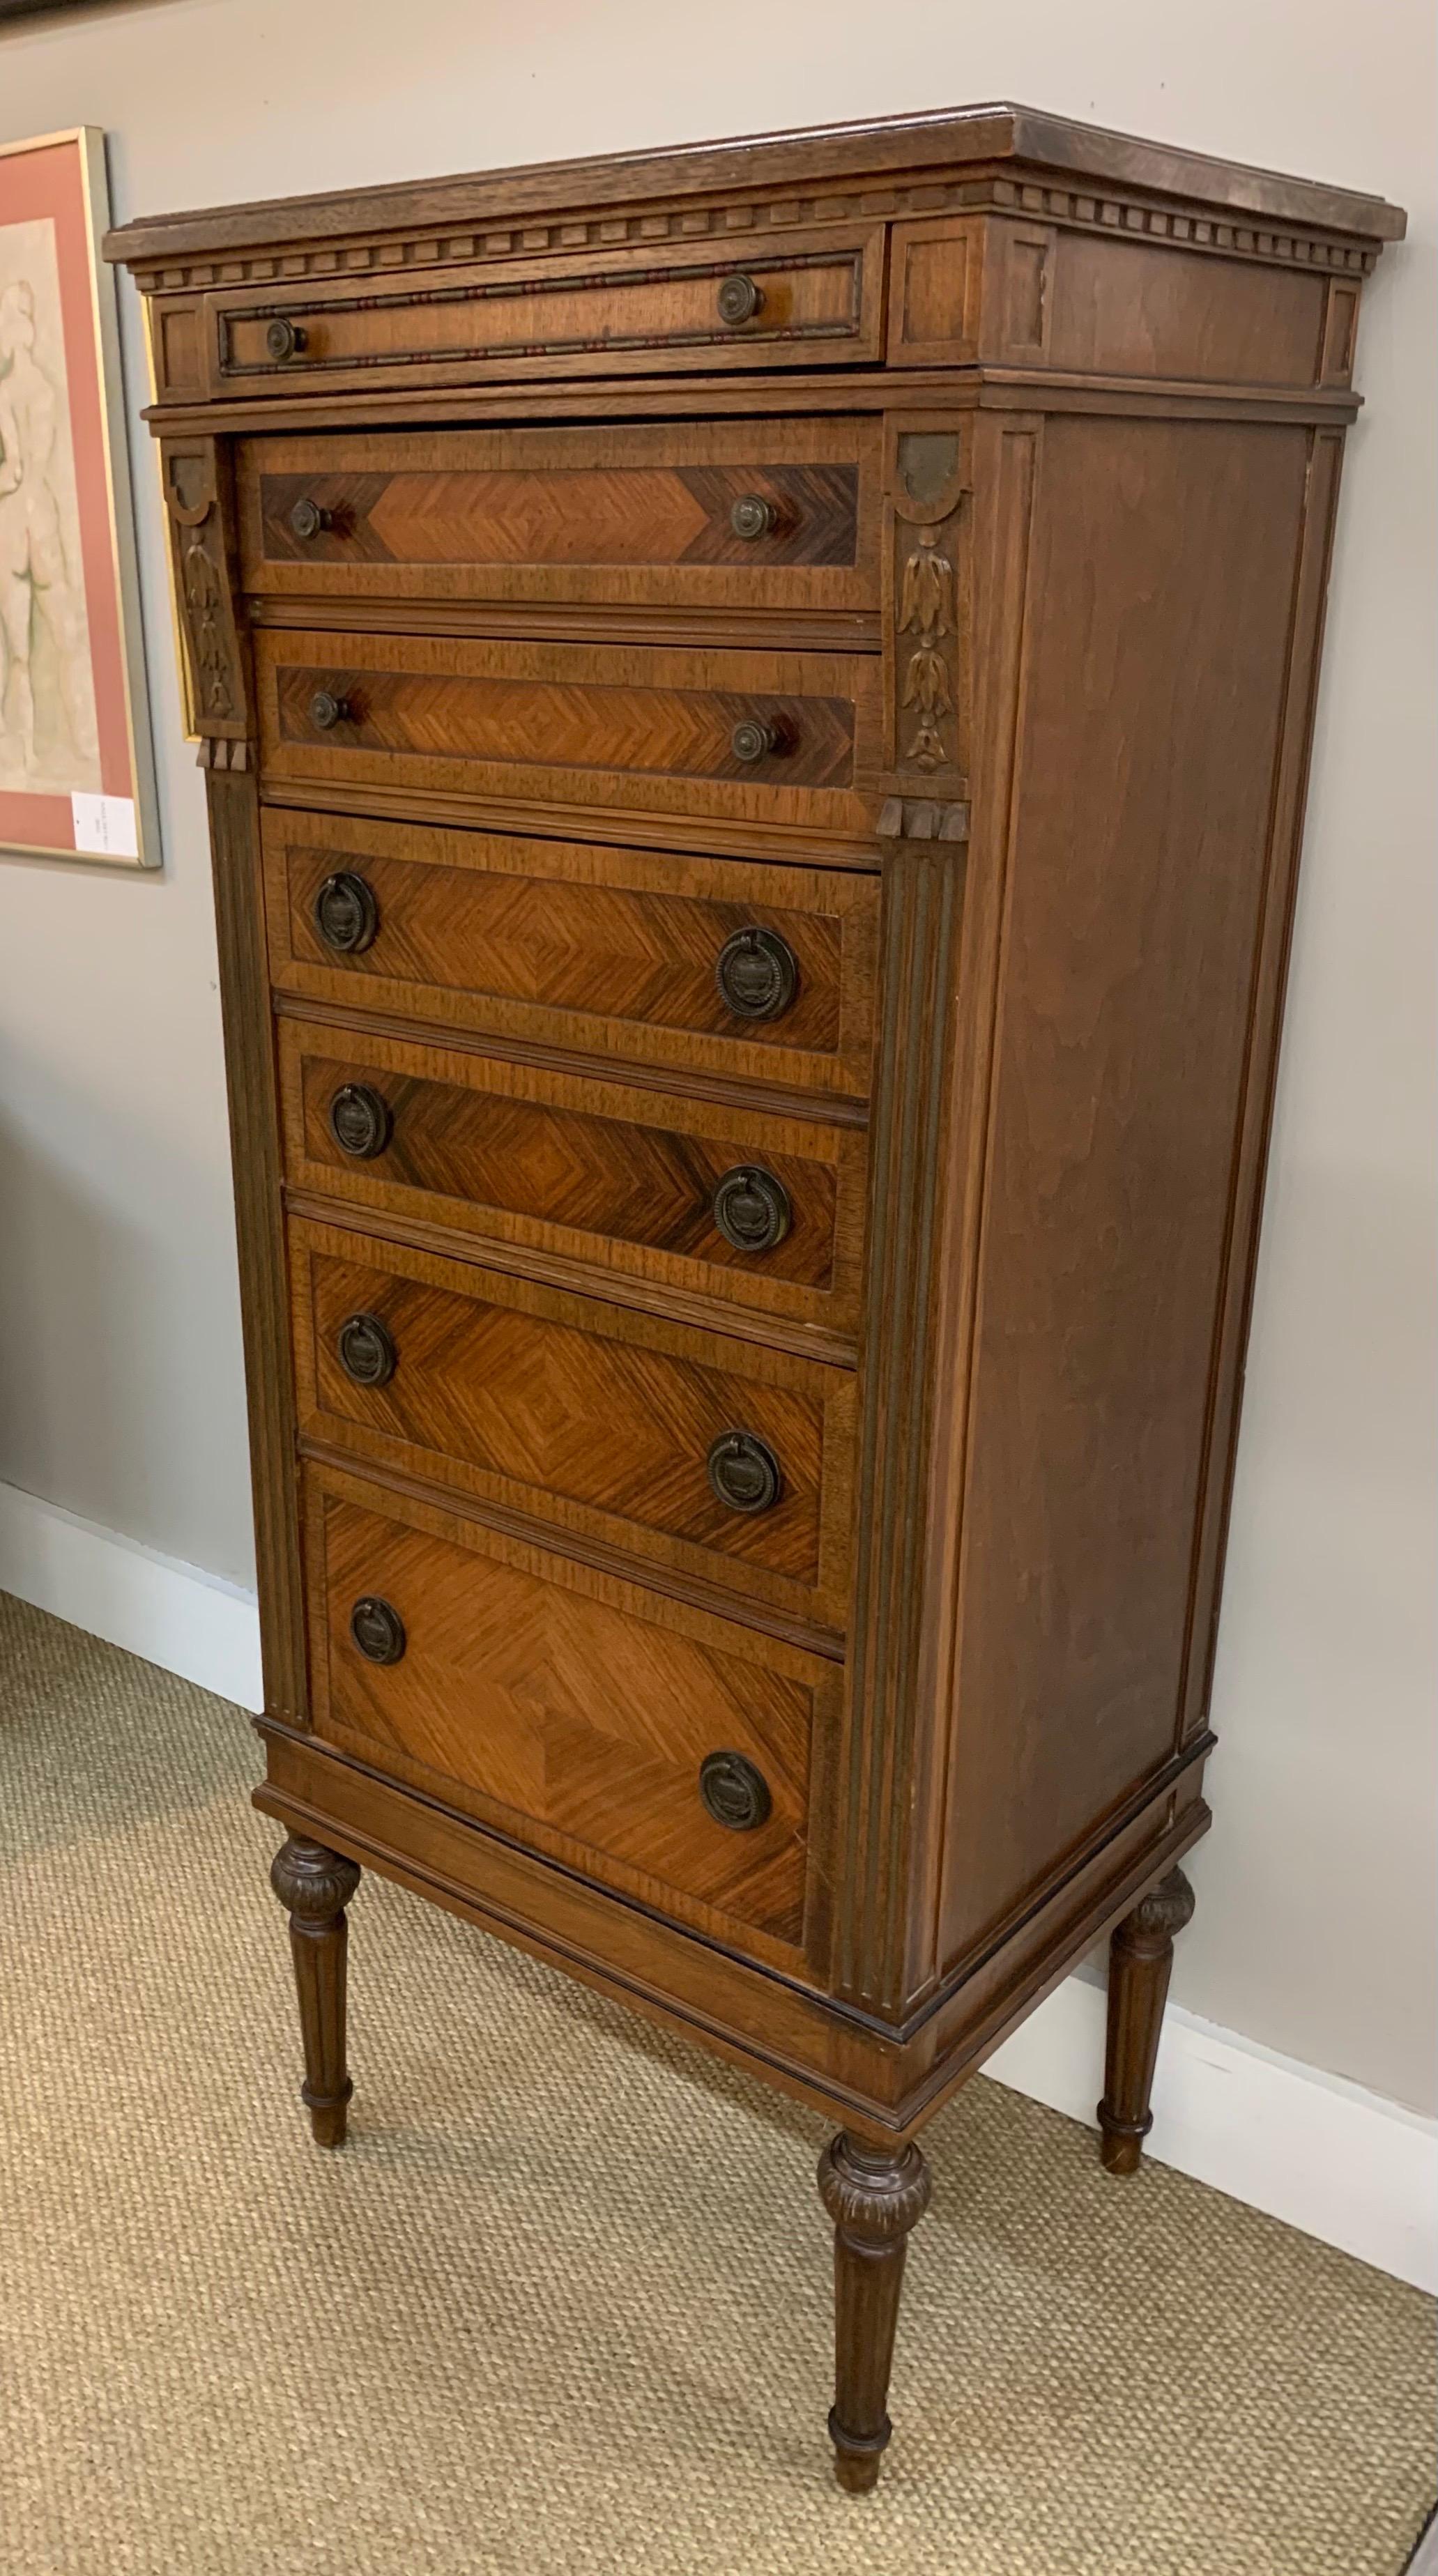 Antique carved mahogany lingerie chest has seven dovetailed drawers and features parquetry on drawer fronts and carved detail all around. It is raised on four carved fluted legs. Original brass hardware.